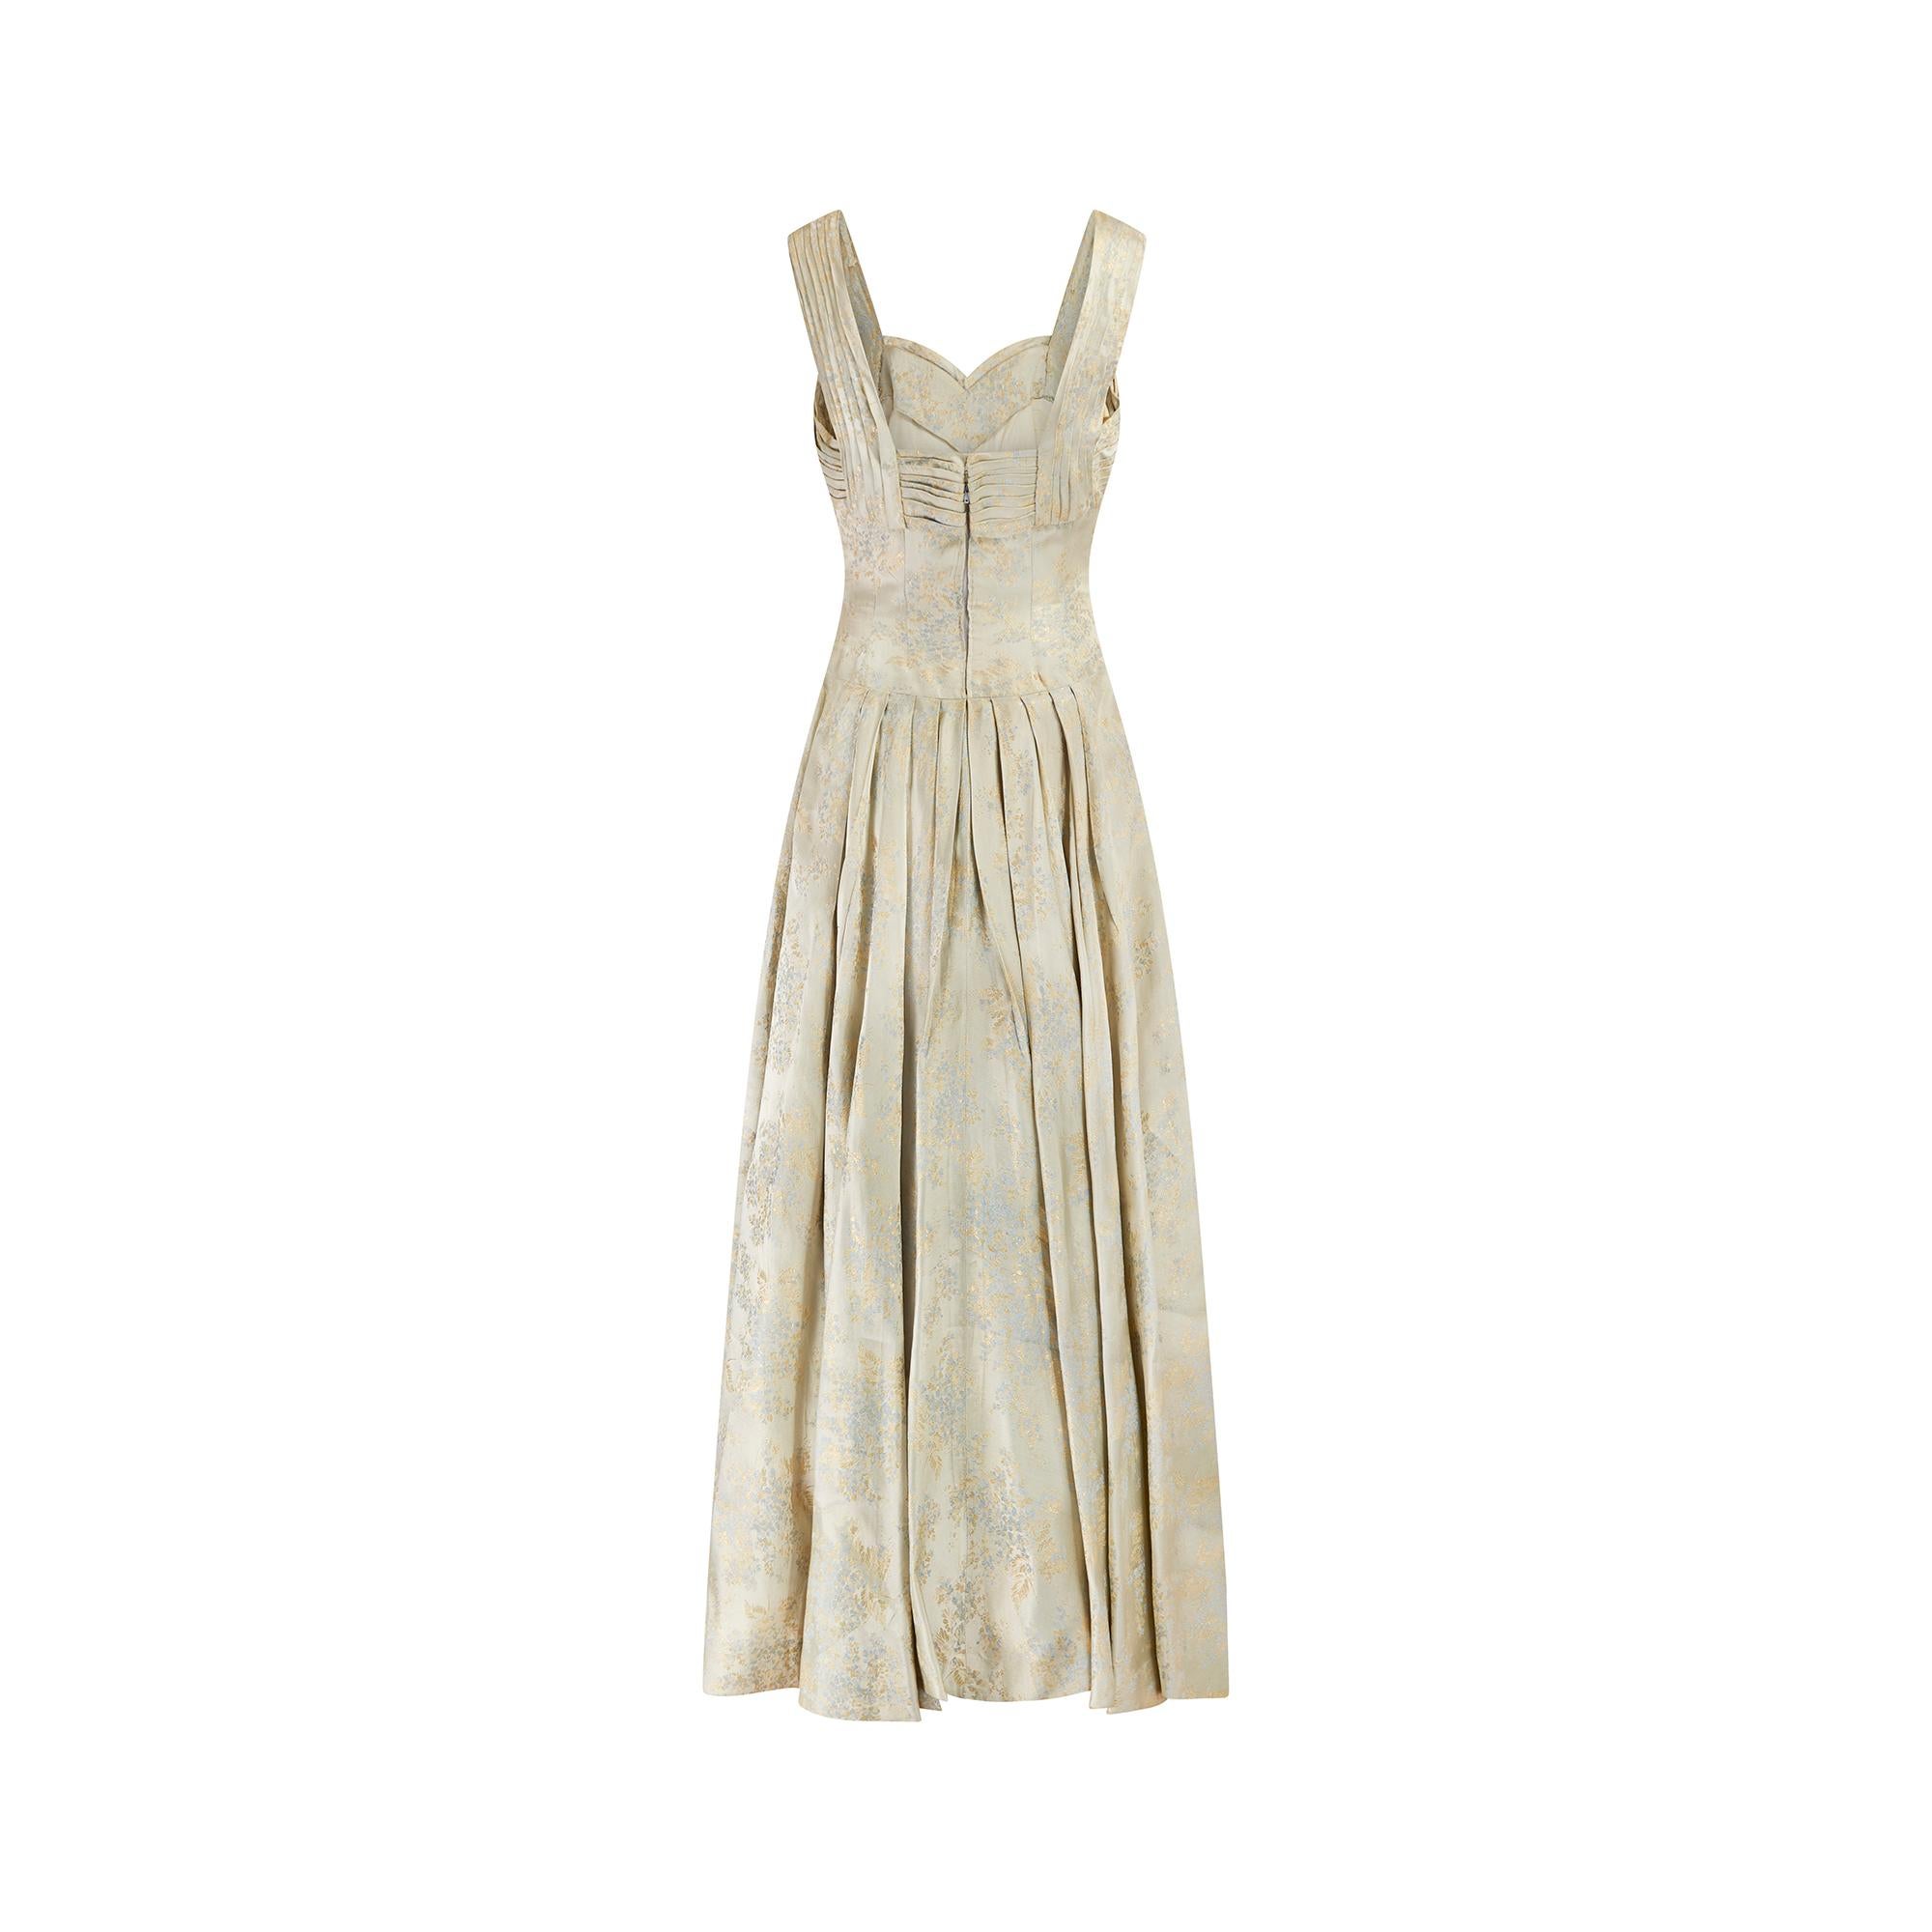 Women's 1950s Pale Gold and Blue Brocade Ball Gown Dress